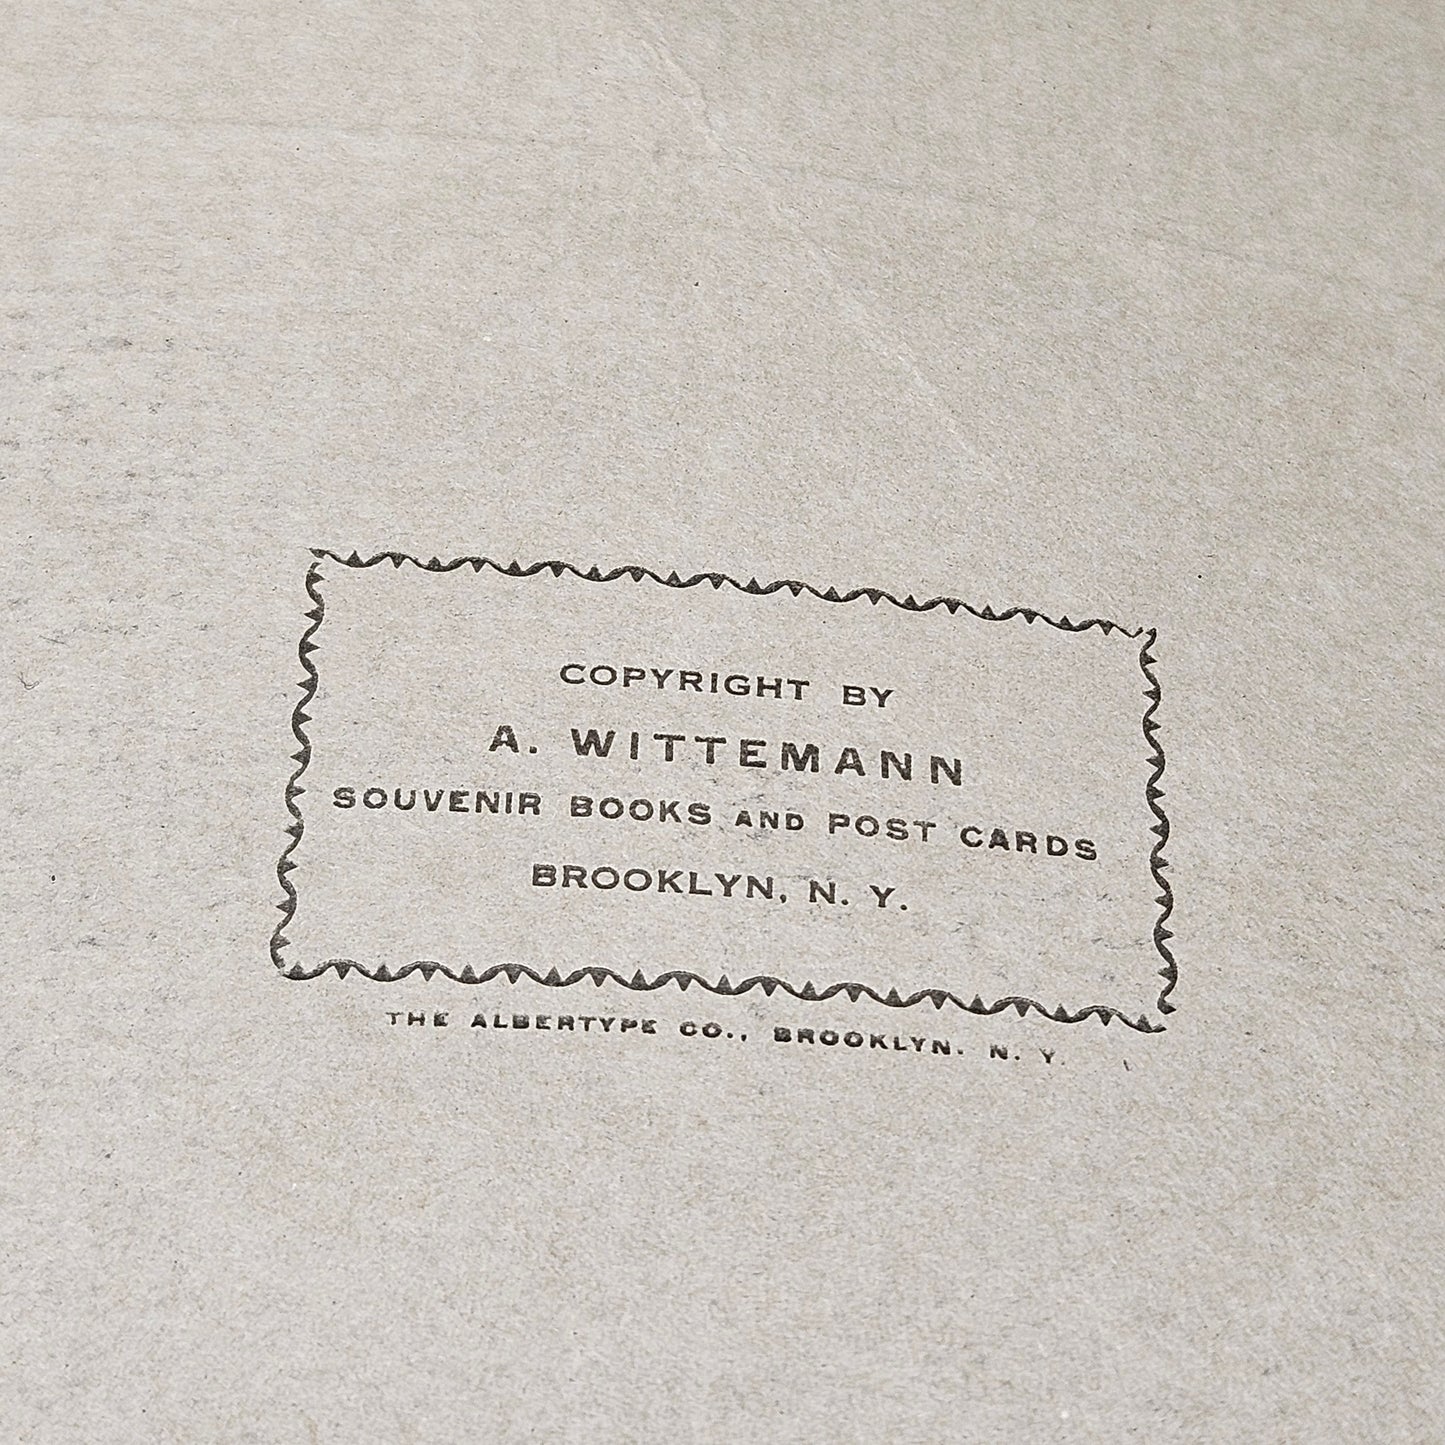 Book: New York Collection of Photographs A. Wittemann Souvenir Books and Post Cards